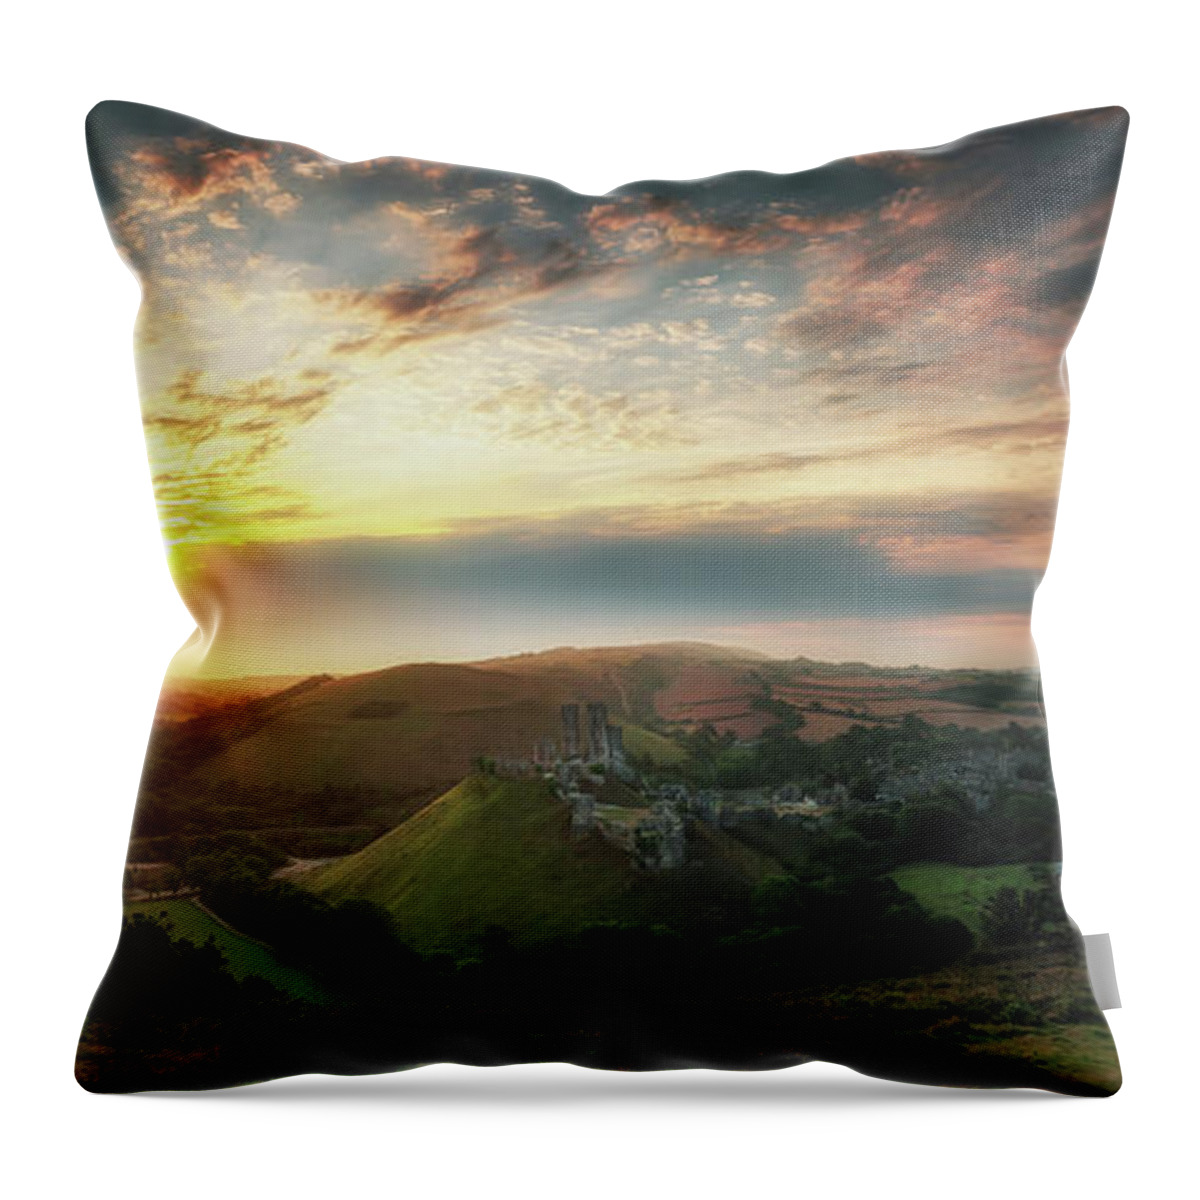 Framing Places Photography Throw Pillow featuring the photograph Spectacular Corfe Sunrise by Framing Places